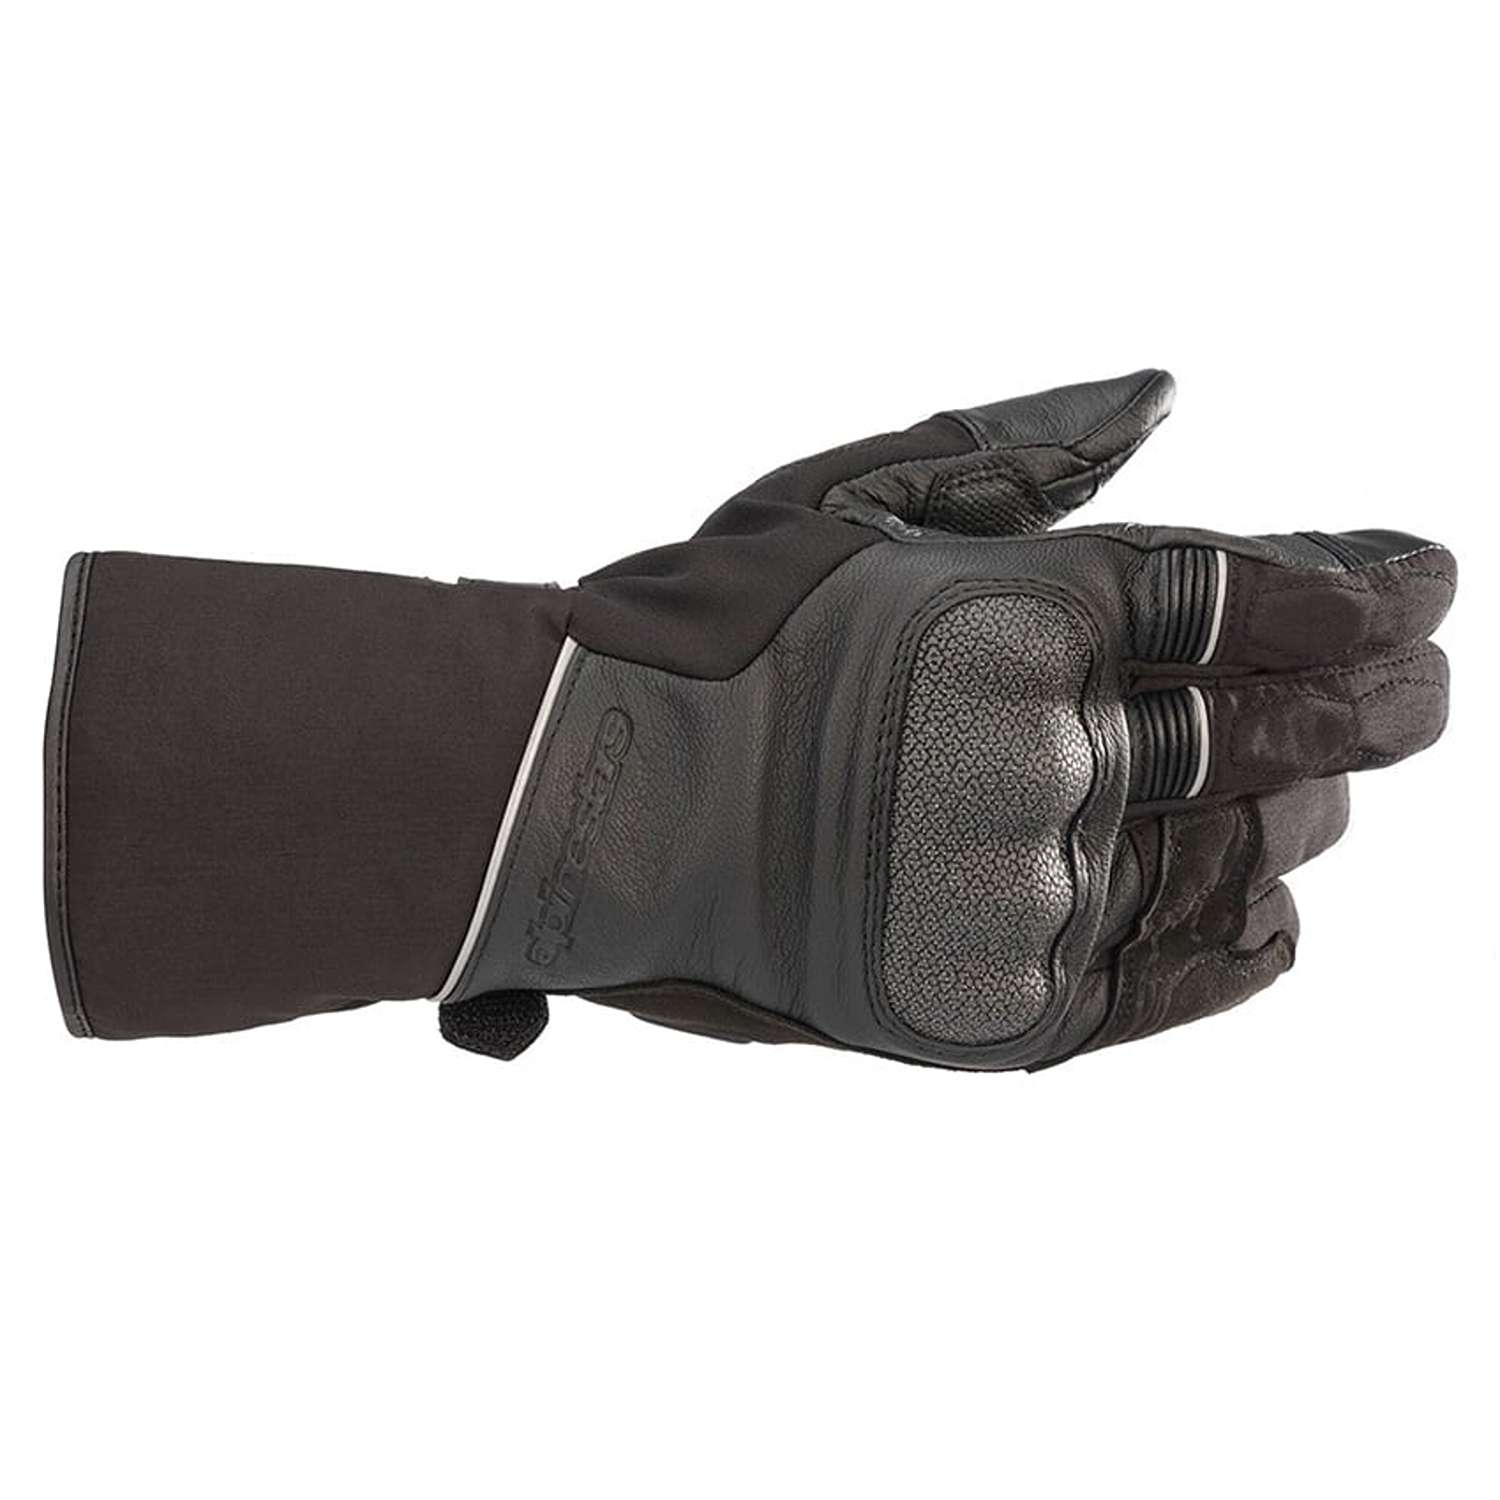 Image of Alpinestars Wr-2 V2 Gore-Tex Gloves With Gore Grip Technology Black Taille M